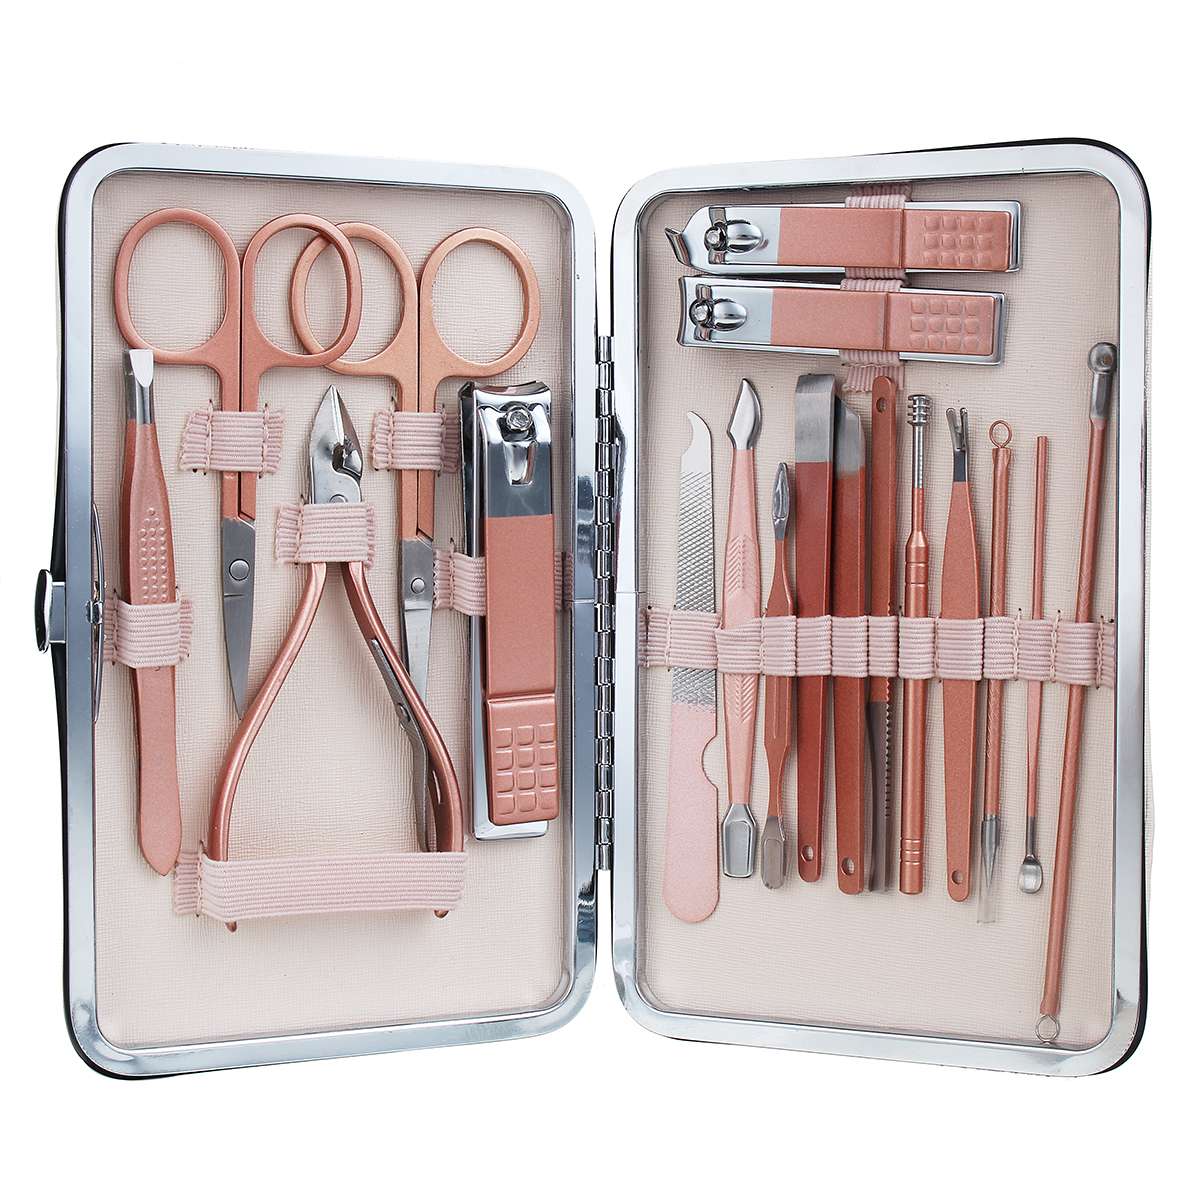 Set of 18 Pack, Portable Nail Kit Manicure Set Professional Stainless ...